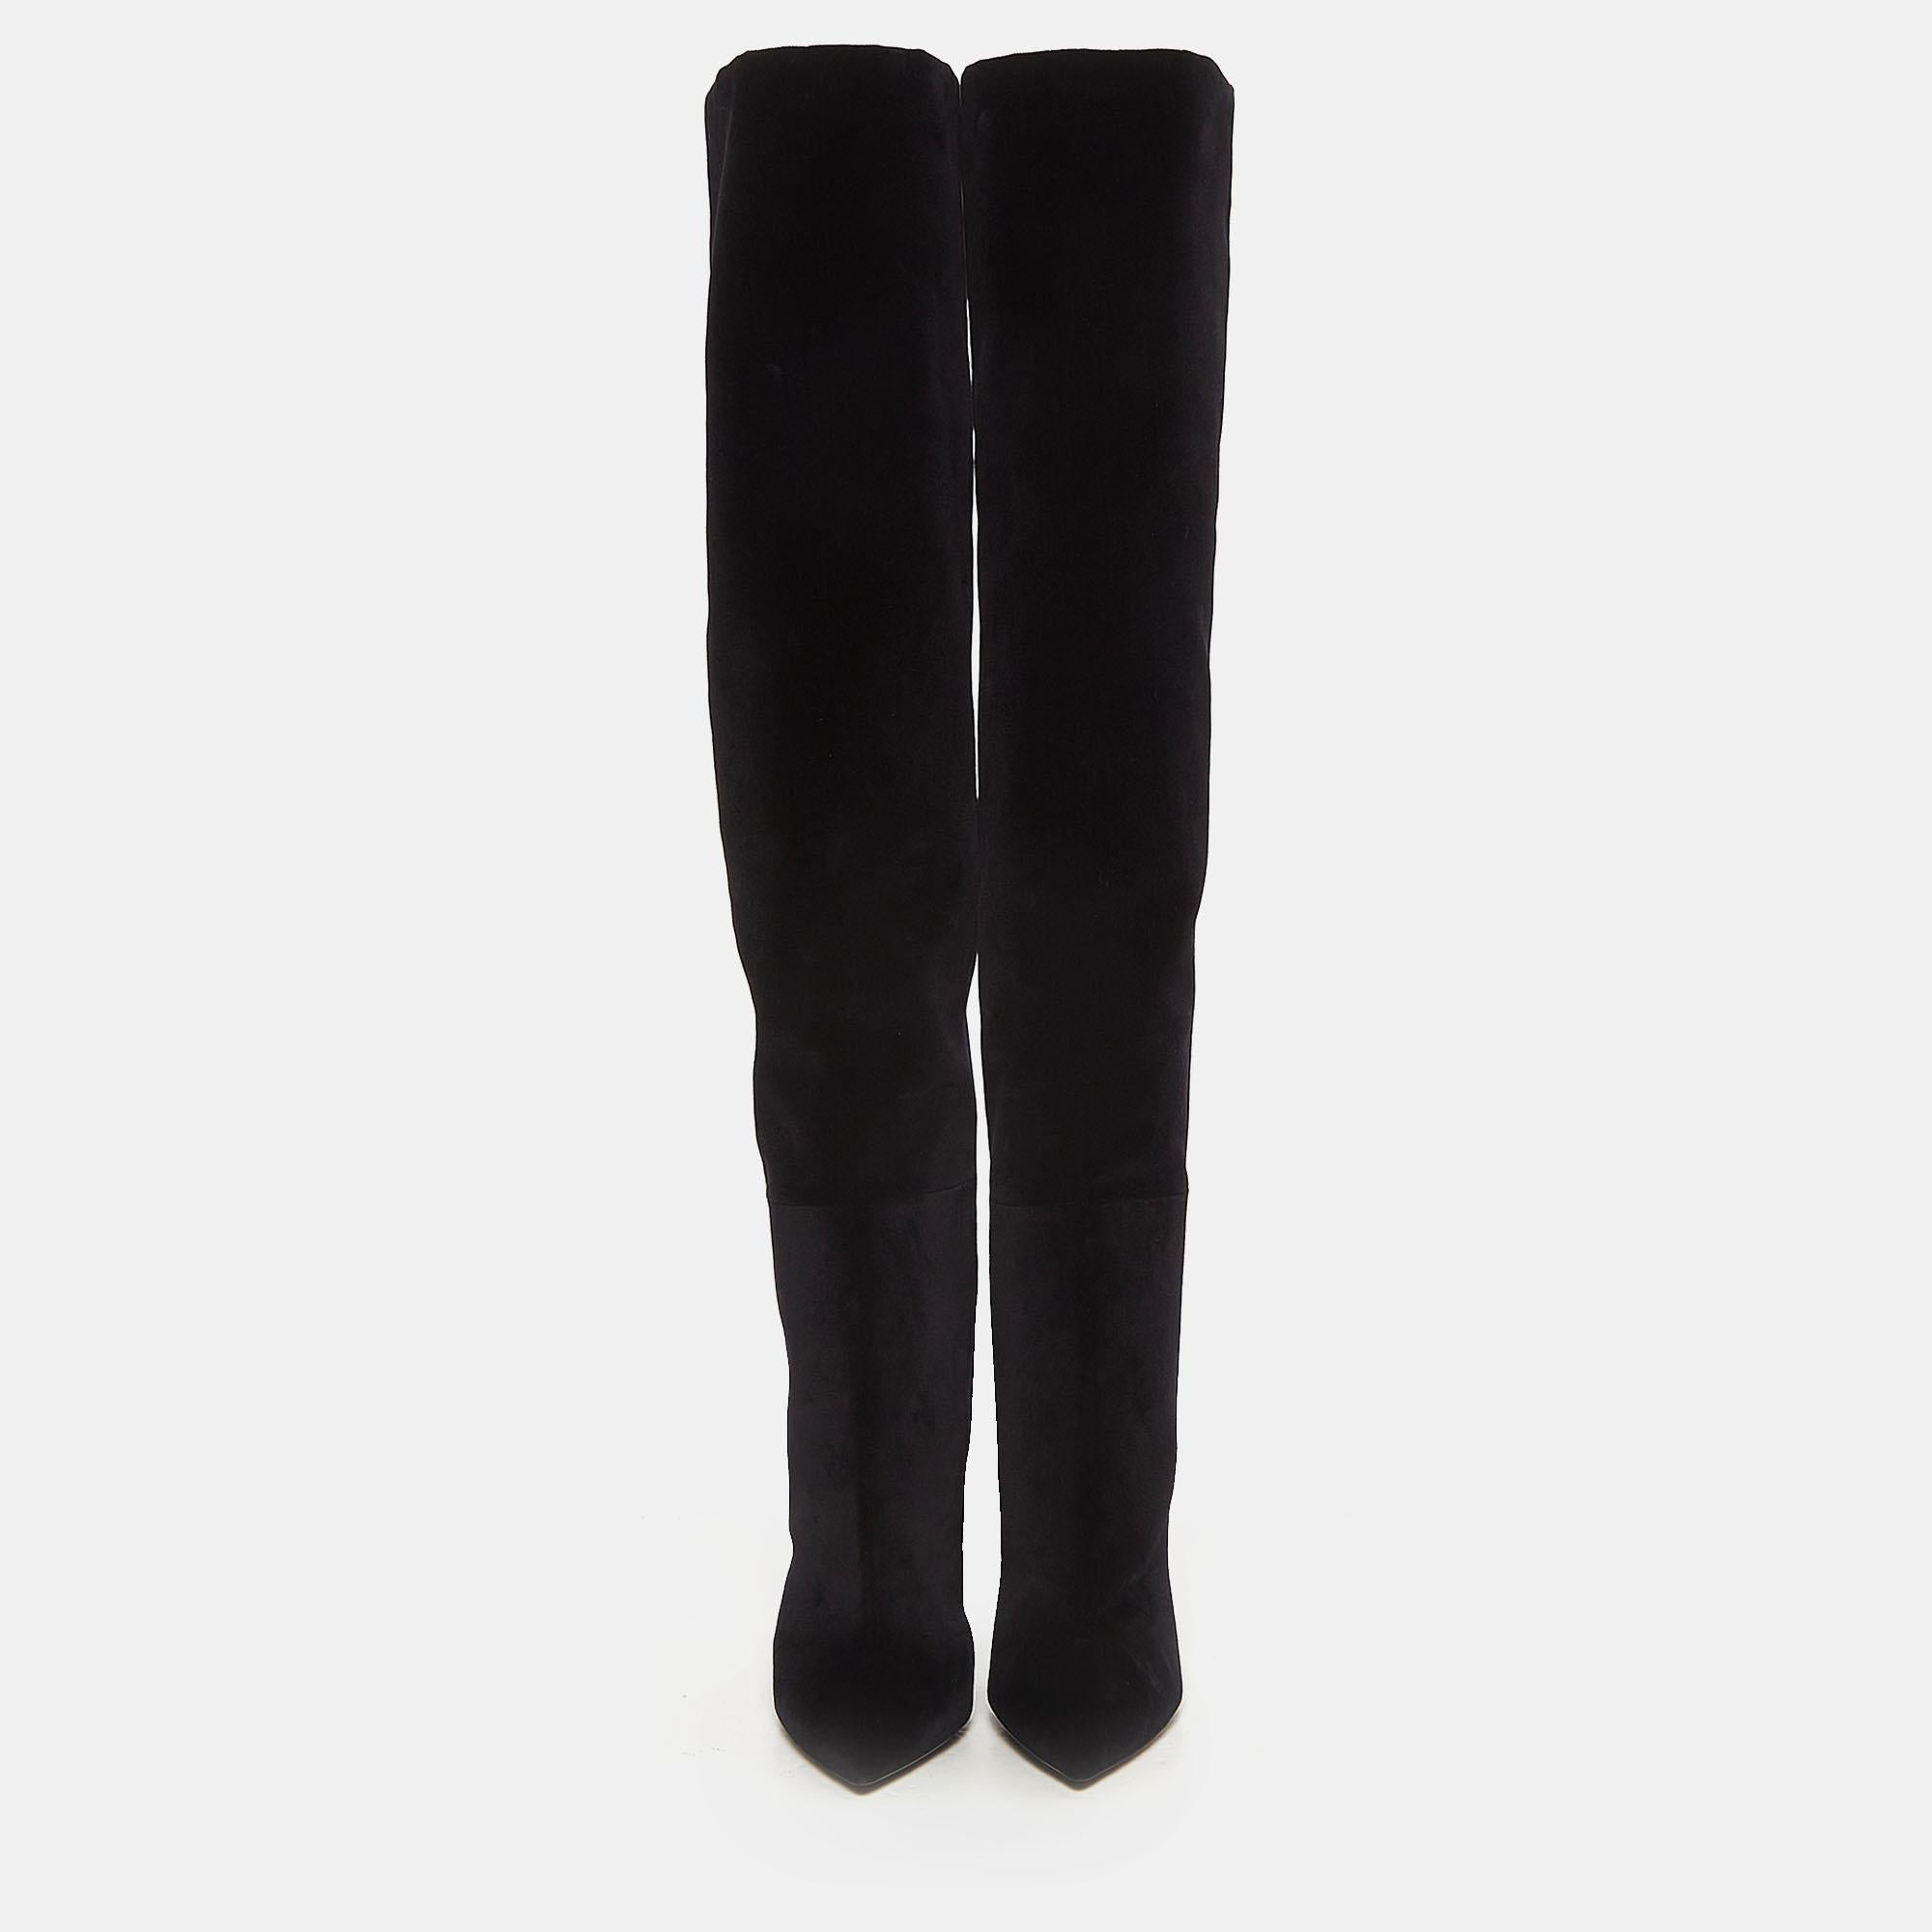 Saint Laurent never fails to design fashion-forward styles that become favorites in one's closet. These black over-the-knee boots for women are a fine example. Made from velvet, they feature pointed toes and 11.5 cm heels.

Includes
Original